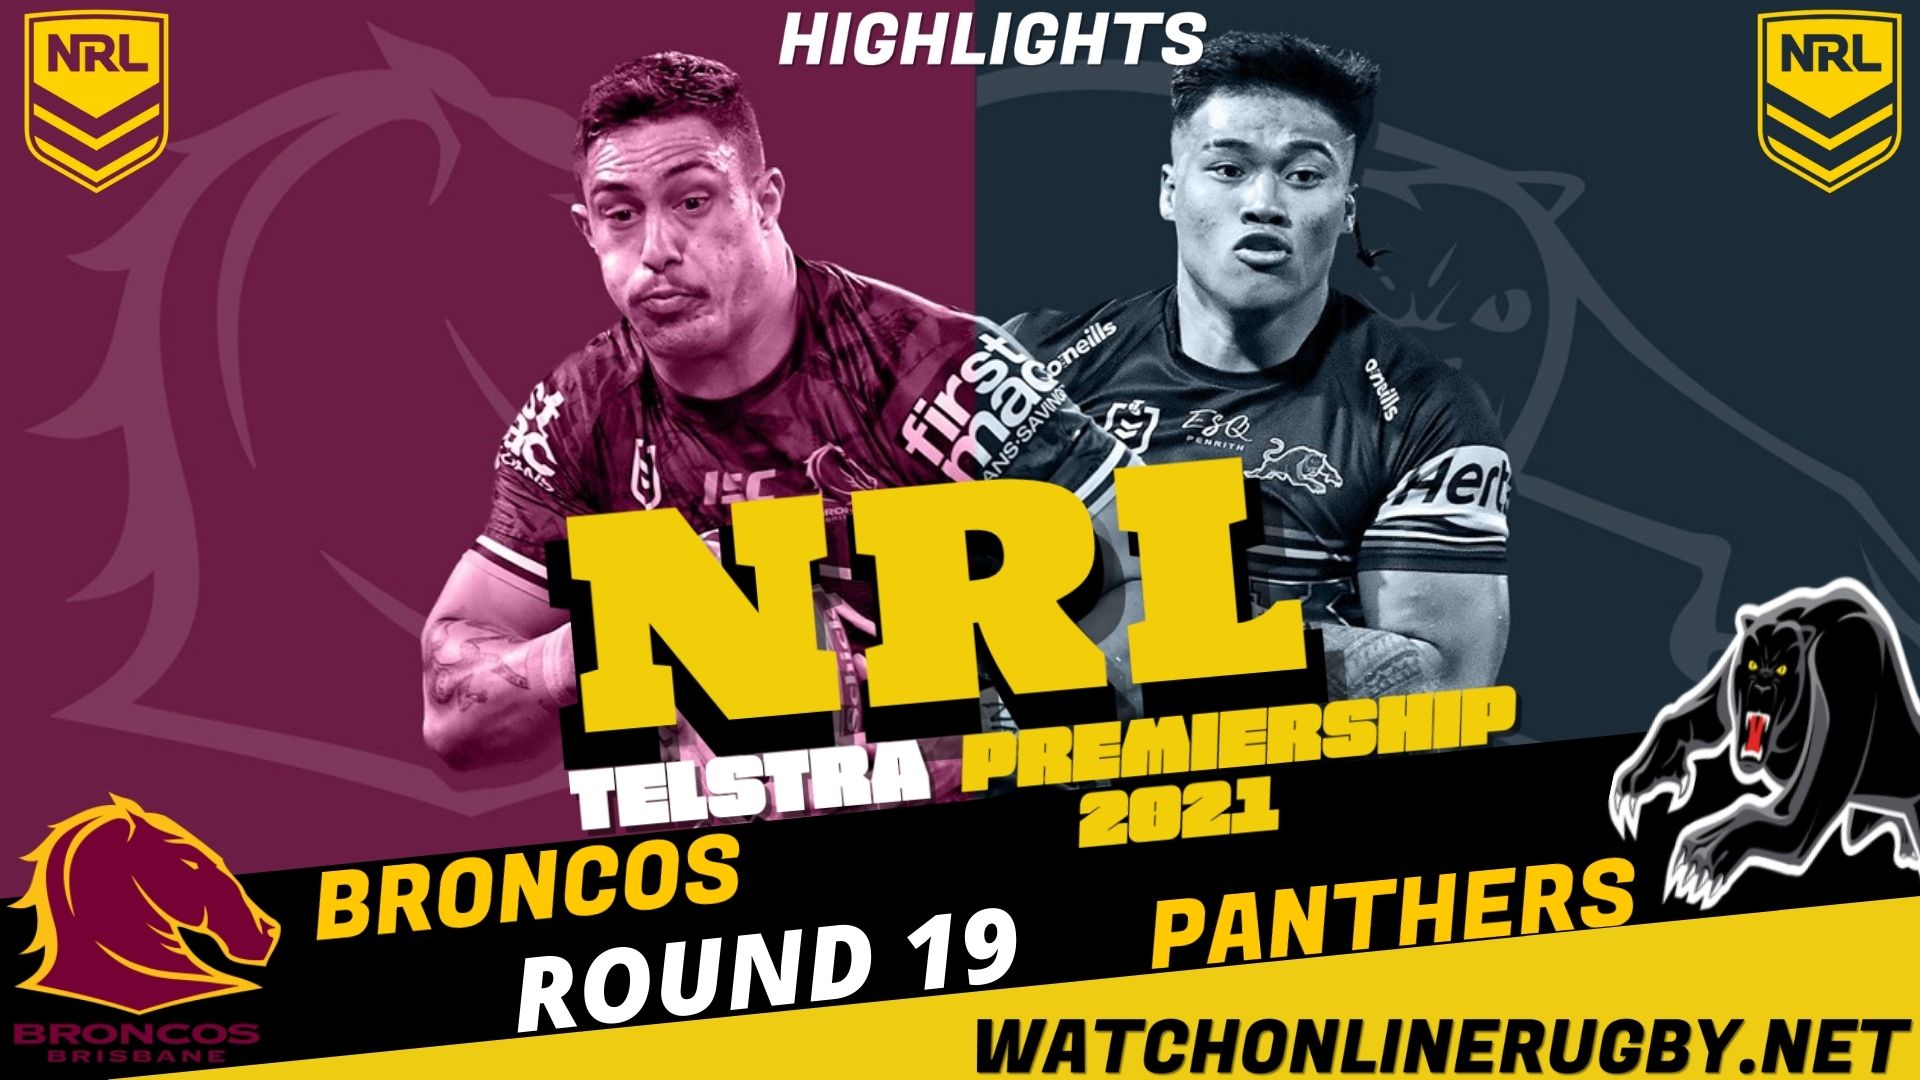 Panthers Vs Broncos Highlights RD 19 NRL Rugby